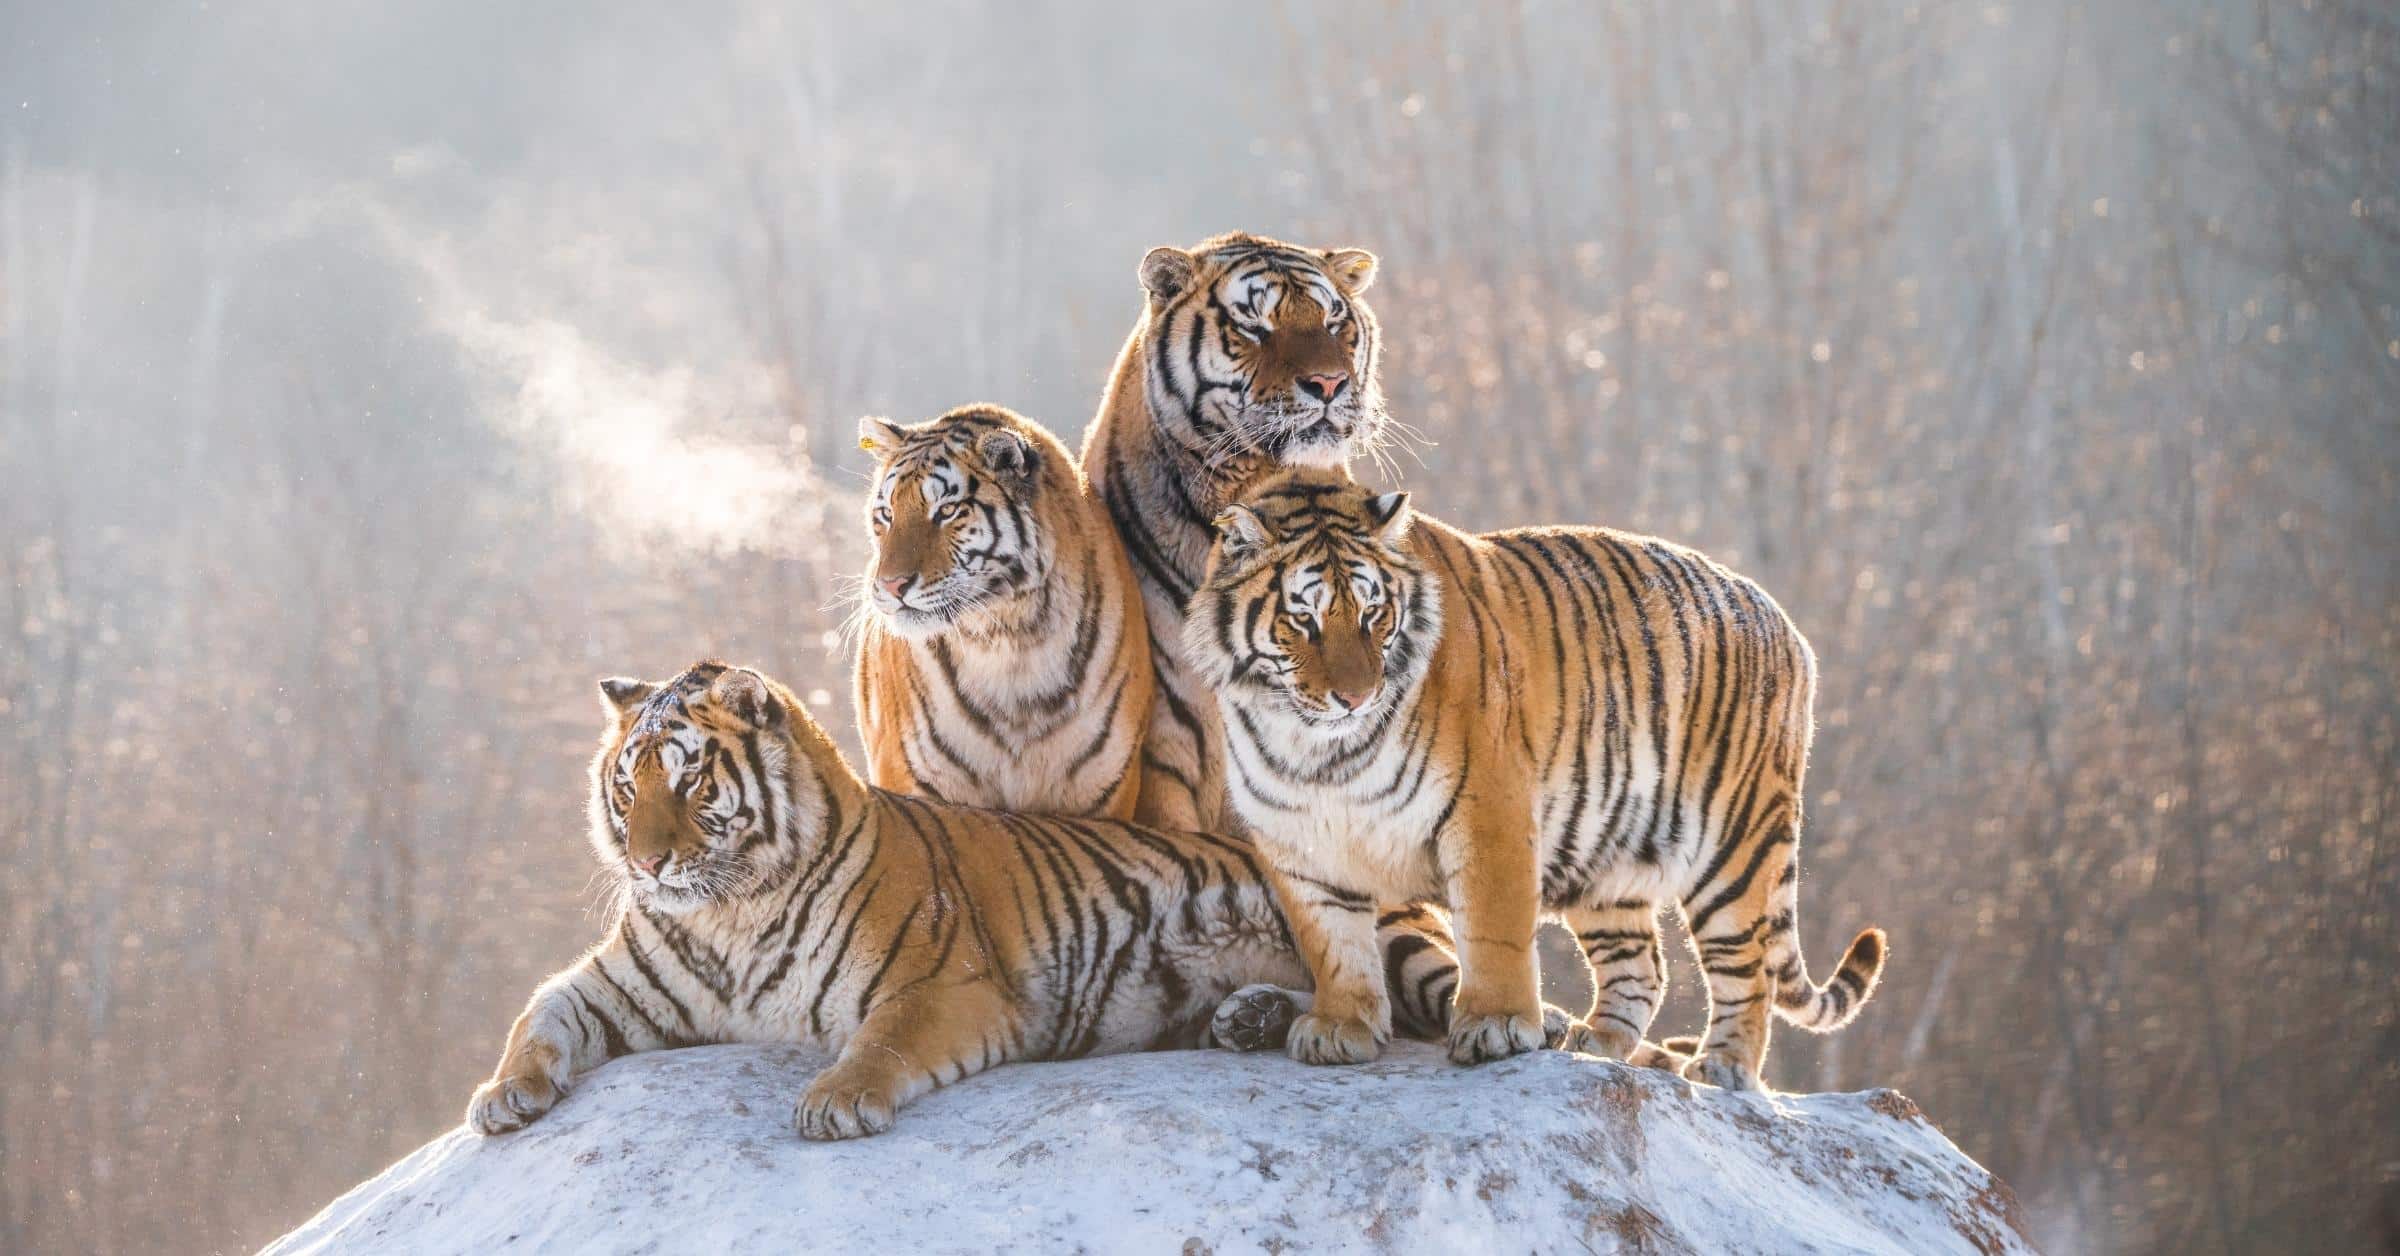 Importance of tigers